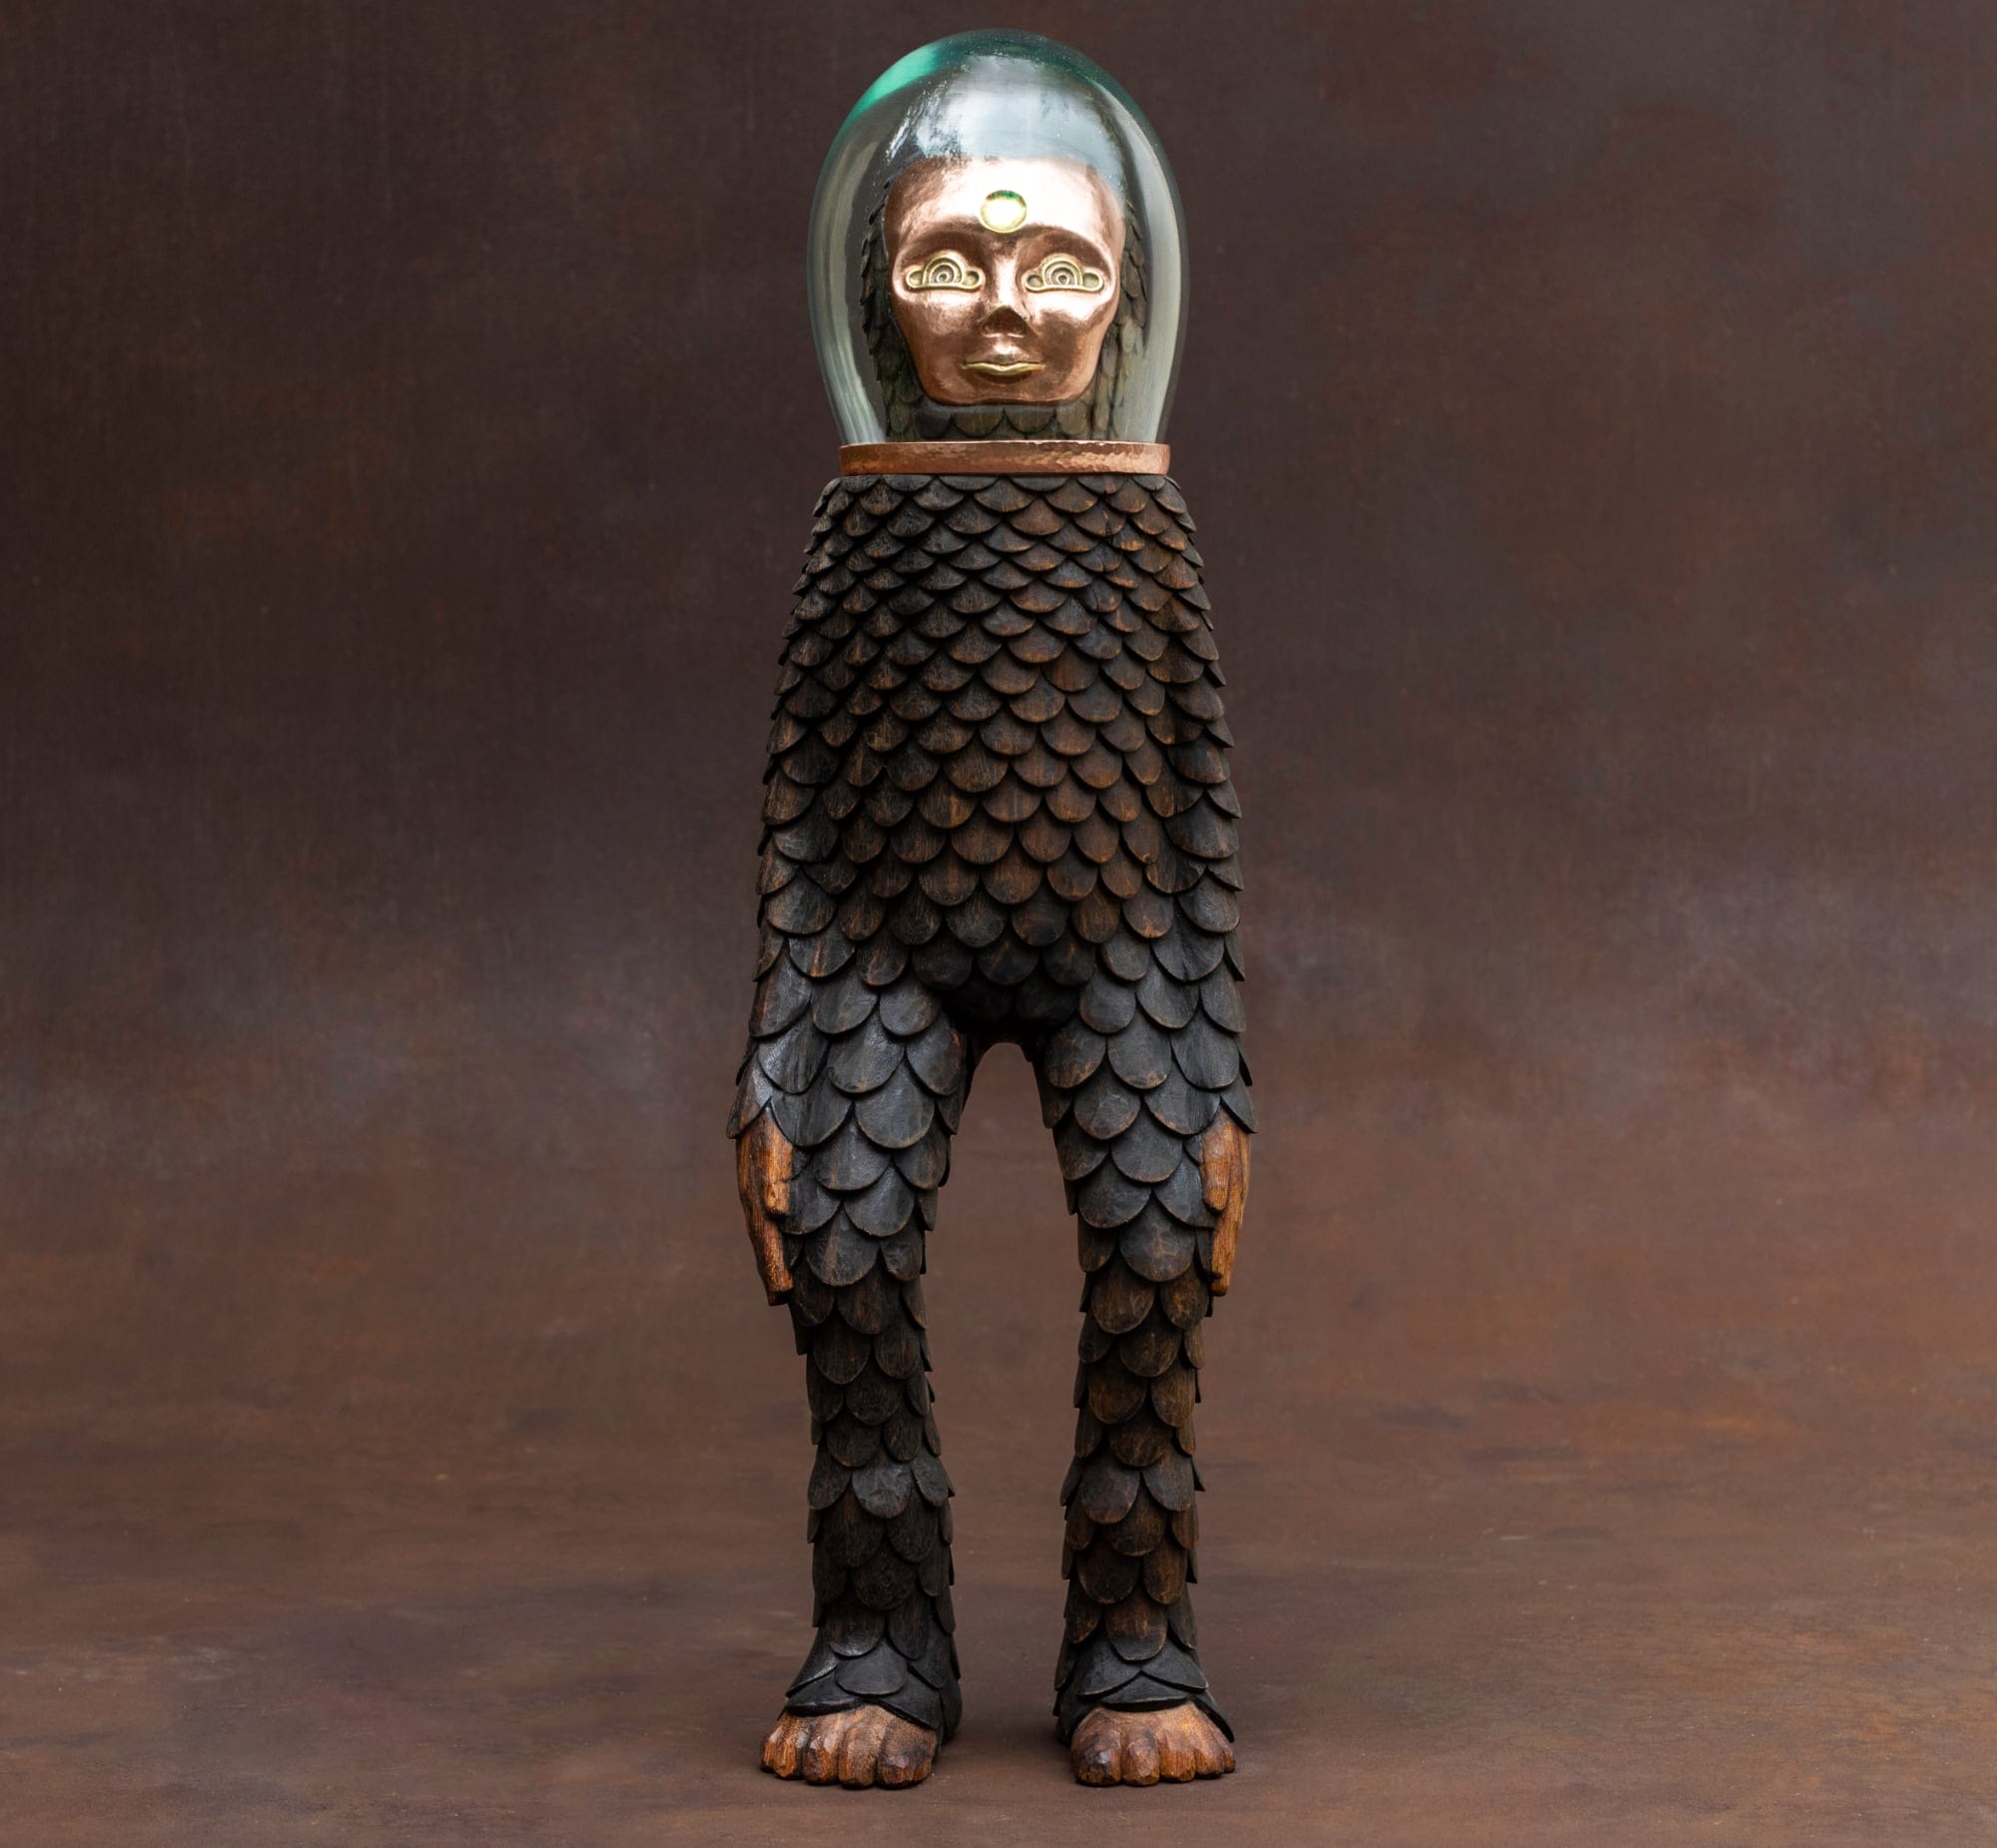 a character with a pinecone like body and a clear mask over its face